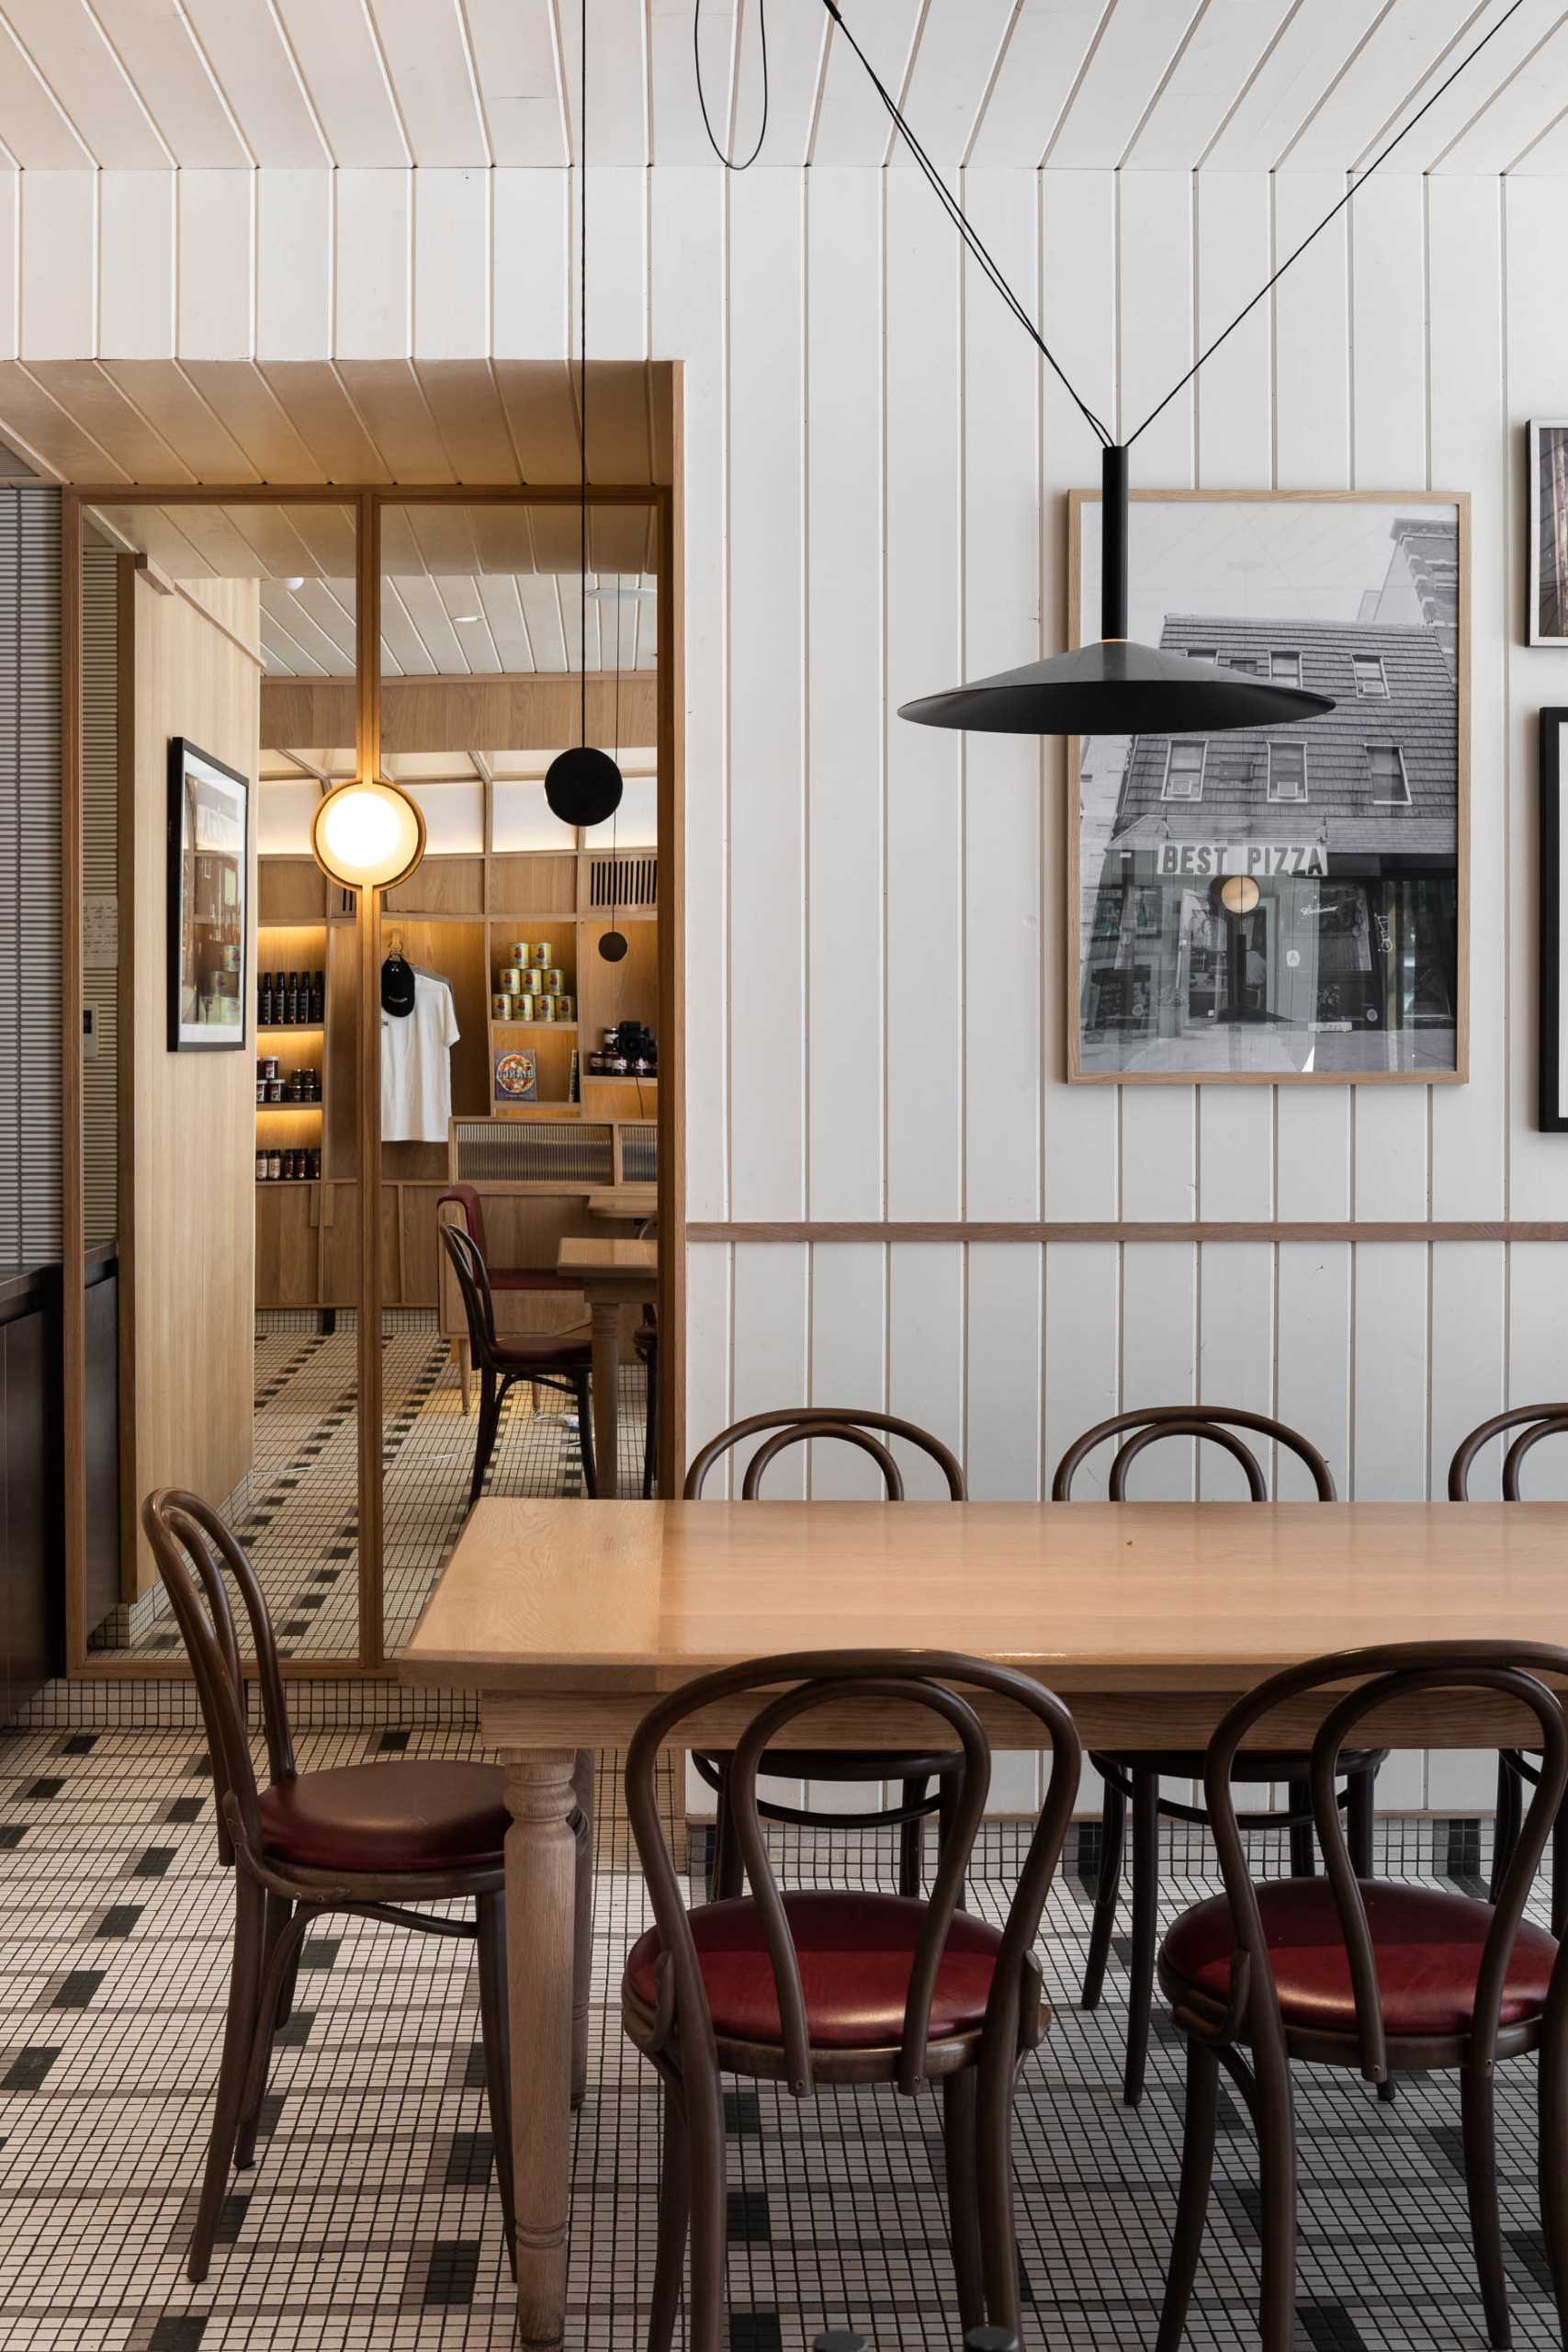 A modern pizzeria that features tile floor, banquette seating, a farm table, and a wall of shelving.